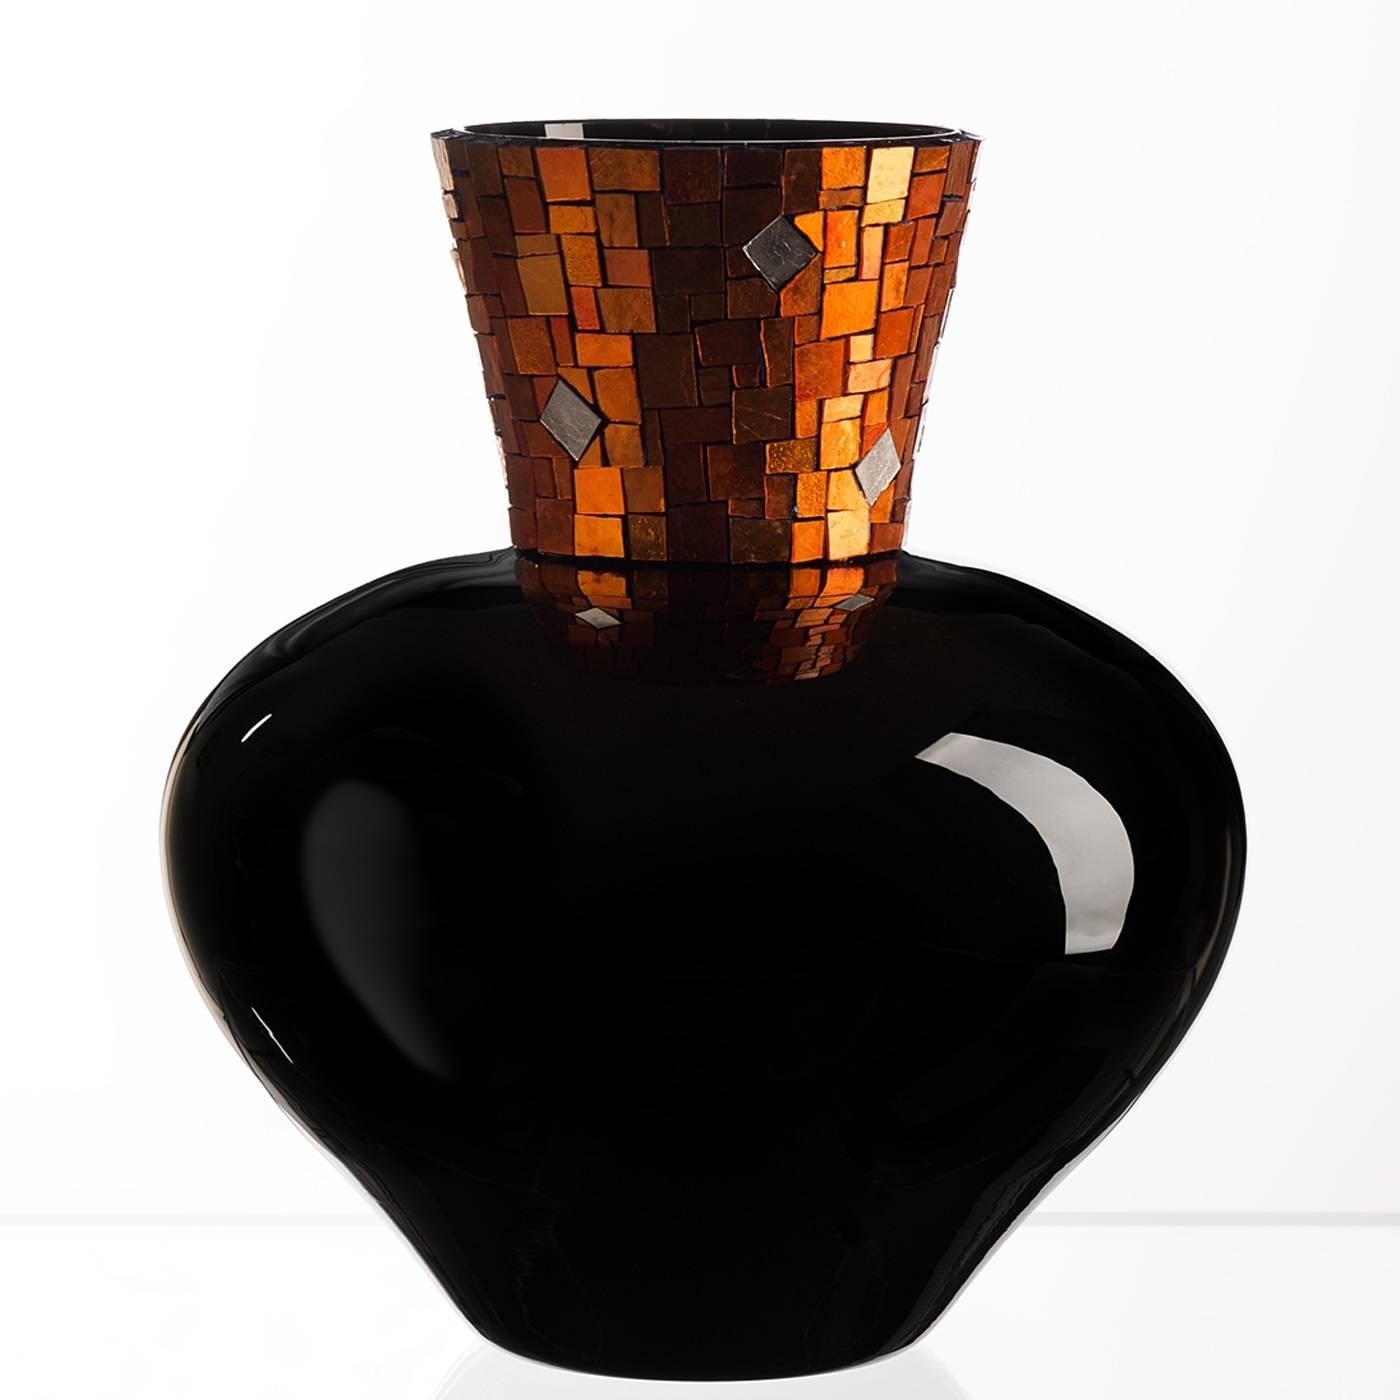 The minimal yet sophisticated shape of this stunning vase part of the Design Collection merges craftsmanship and precious material for a dramatic effect that will add opulence to any decor. Made of Murano mouth-blown black glass, it features a